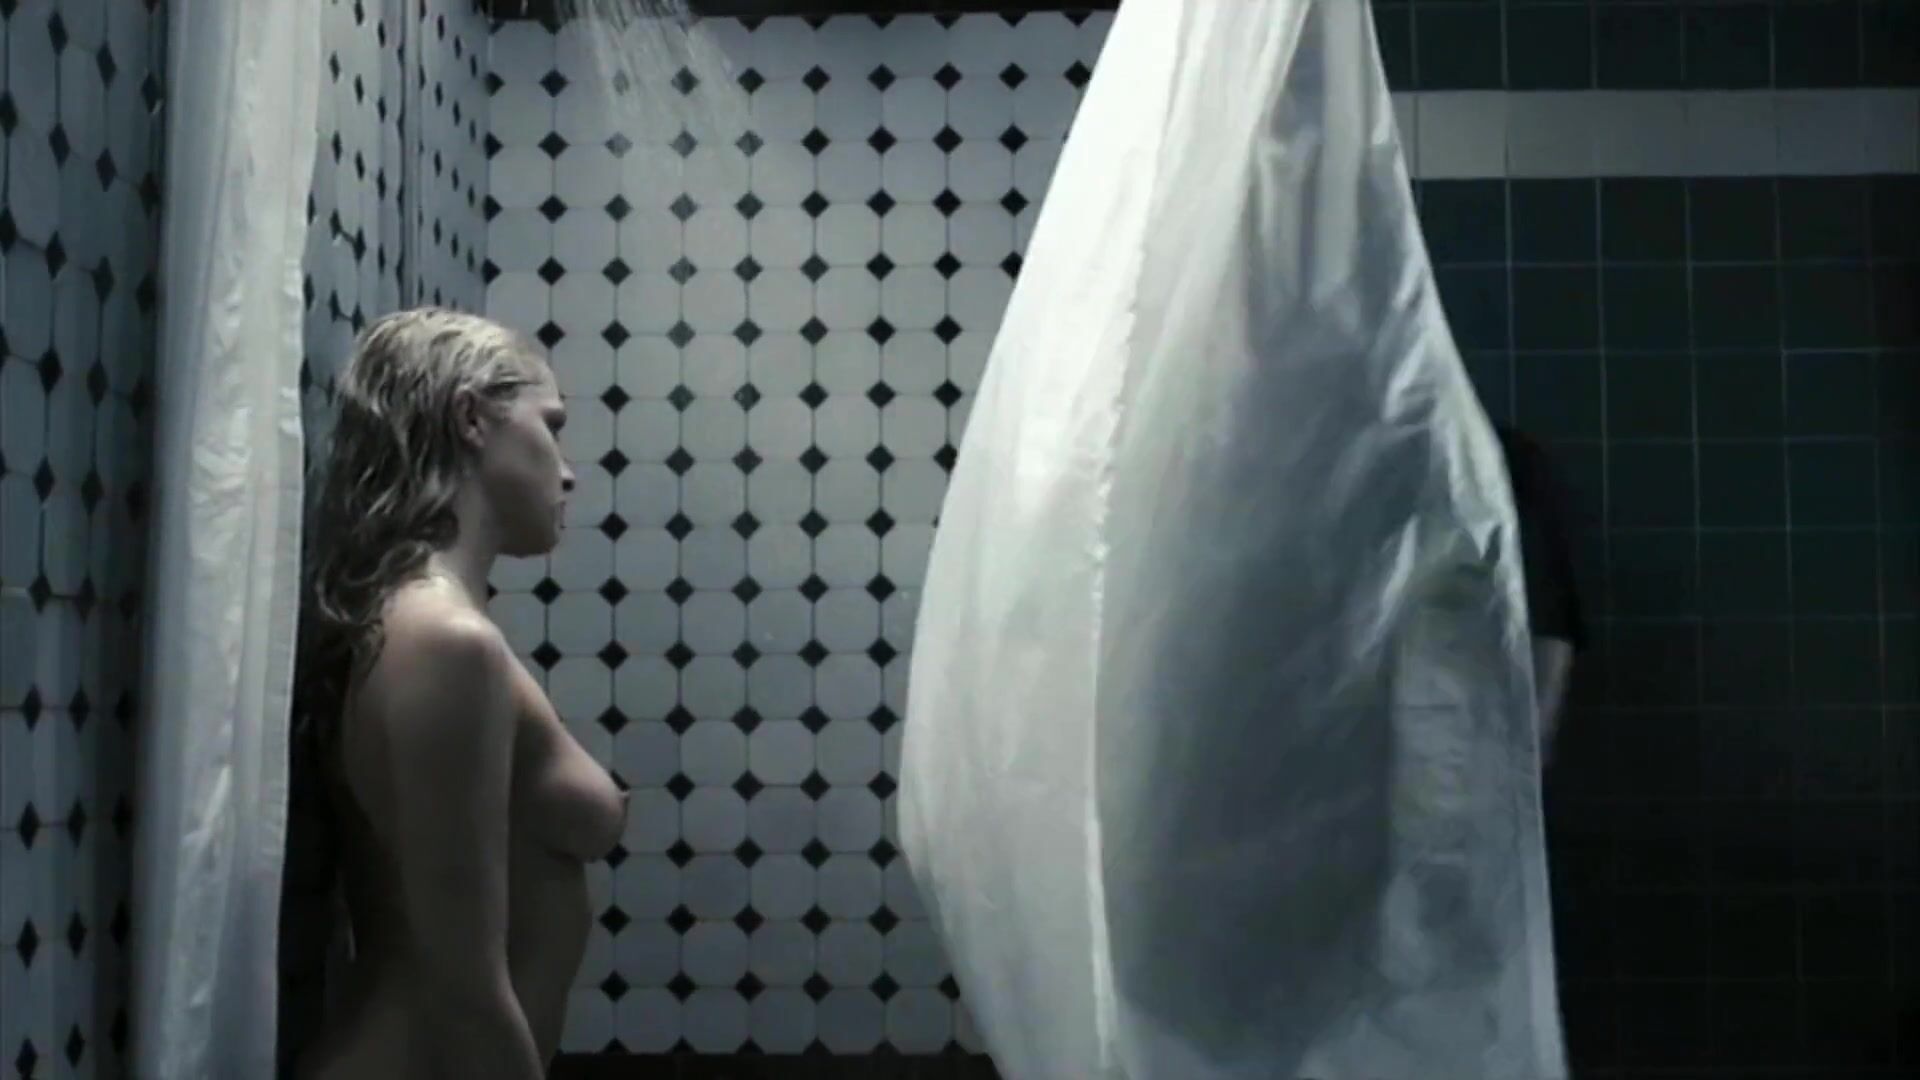 Mother fuck Enjoy Teresa Palmer's naked body and moans while cock enters the pussy in Restraint Groping